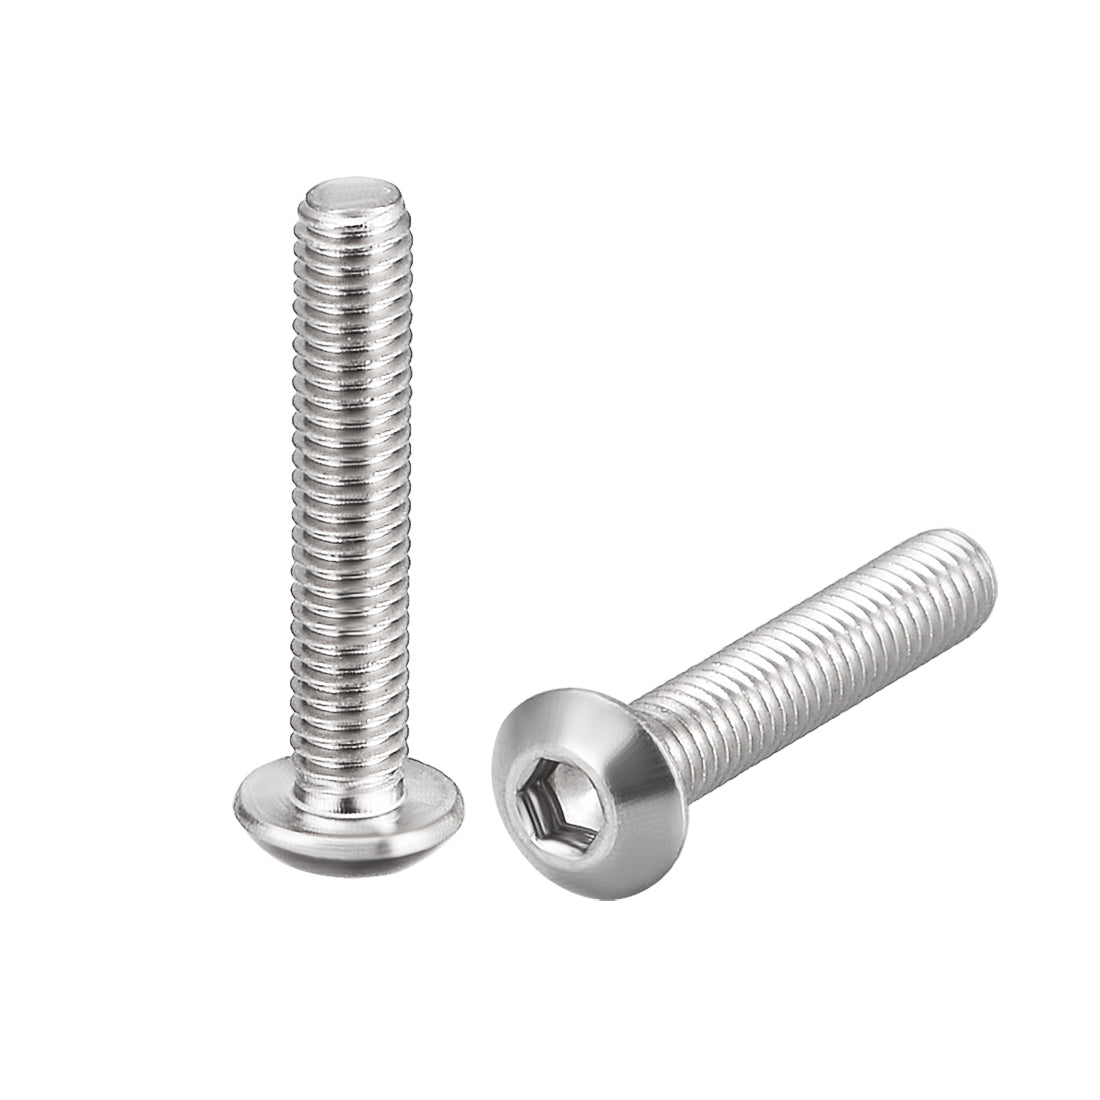 uxcell Uxcell M3x16mm Machine Screws Hex Socket Round Head Screw 304 Stainless Steel Fasteners Bolts 20pcs